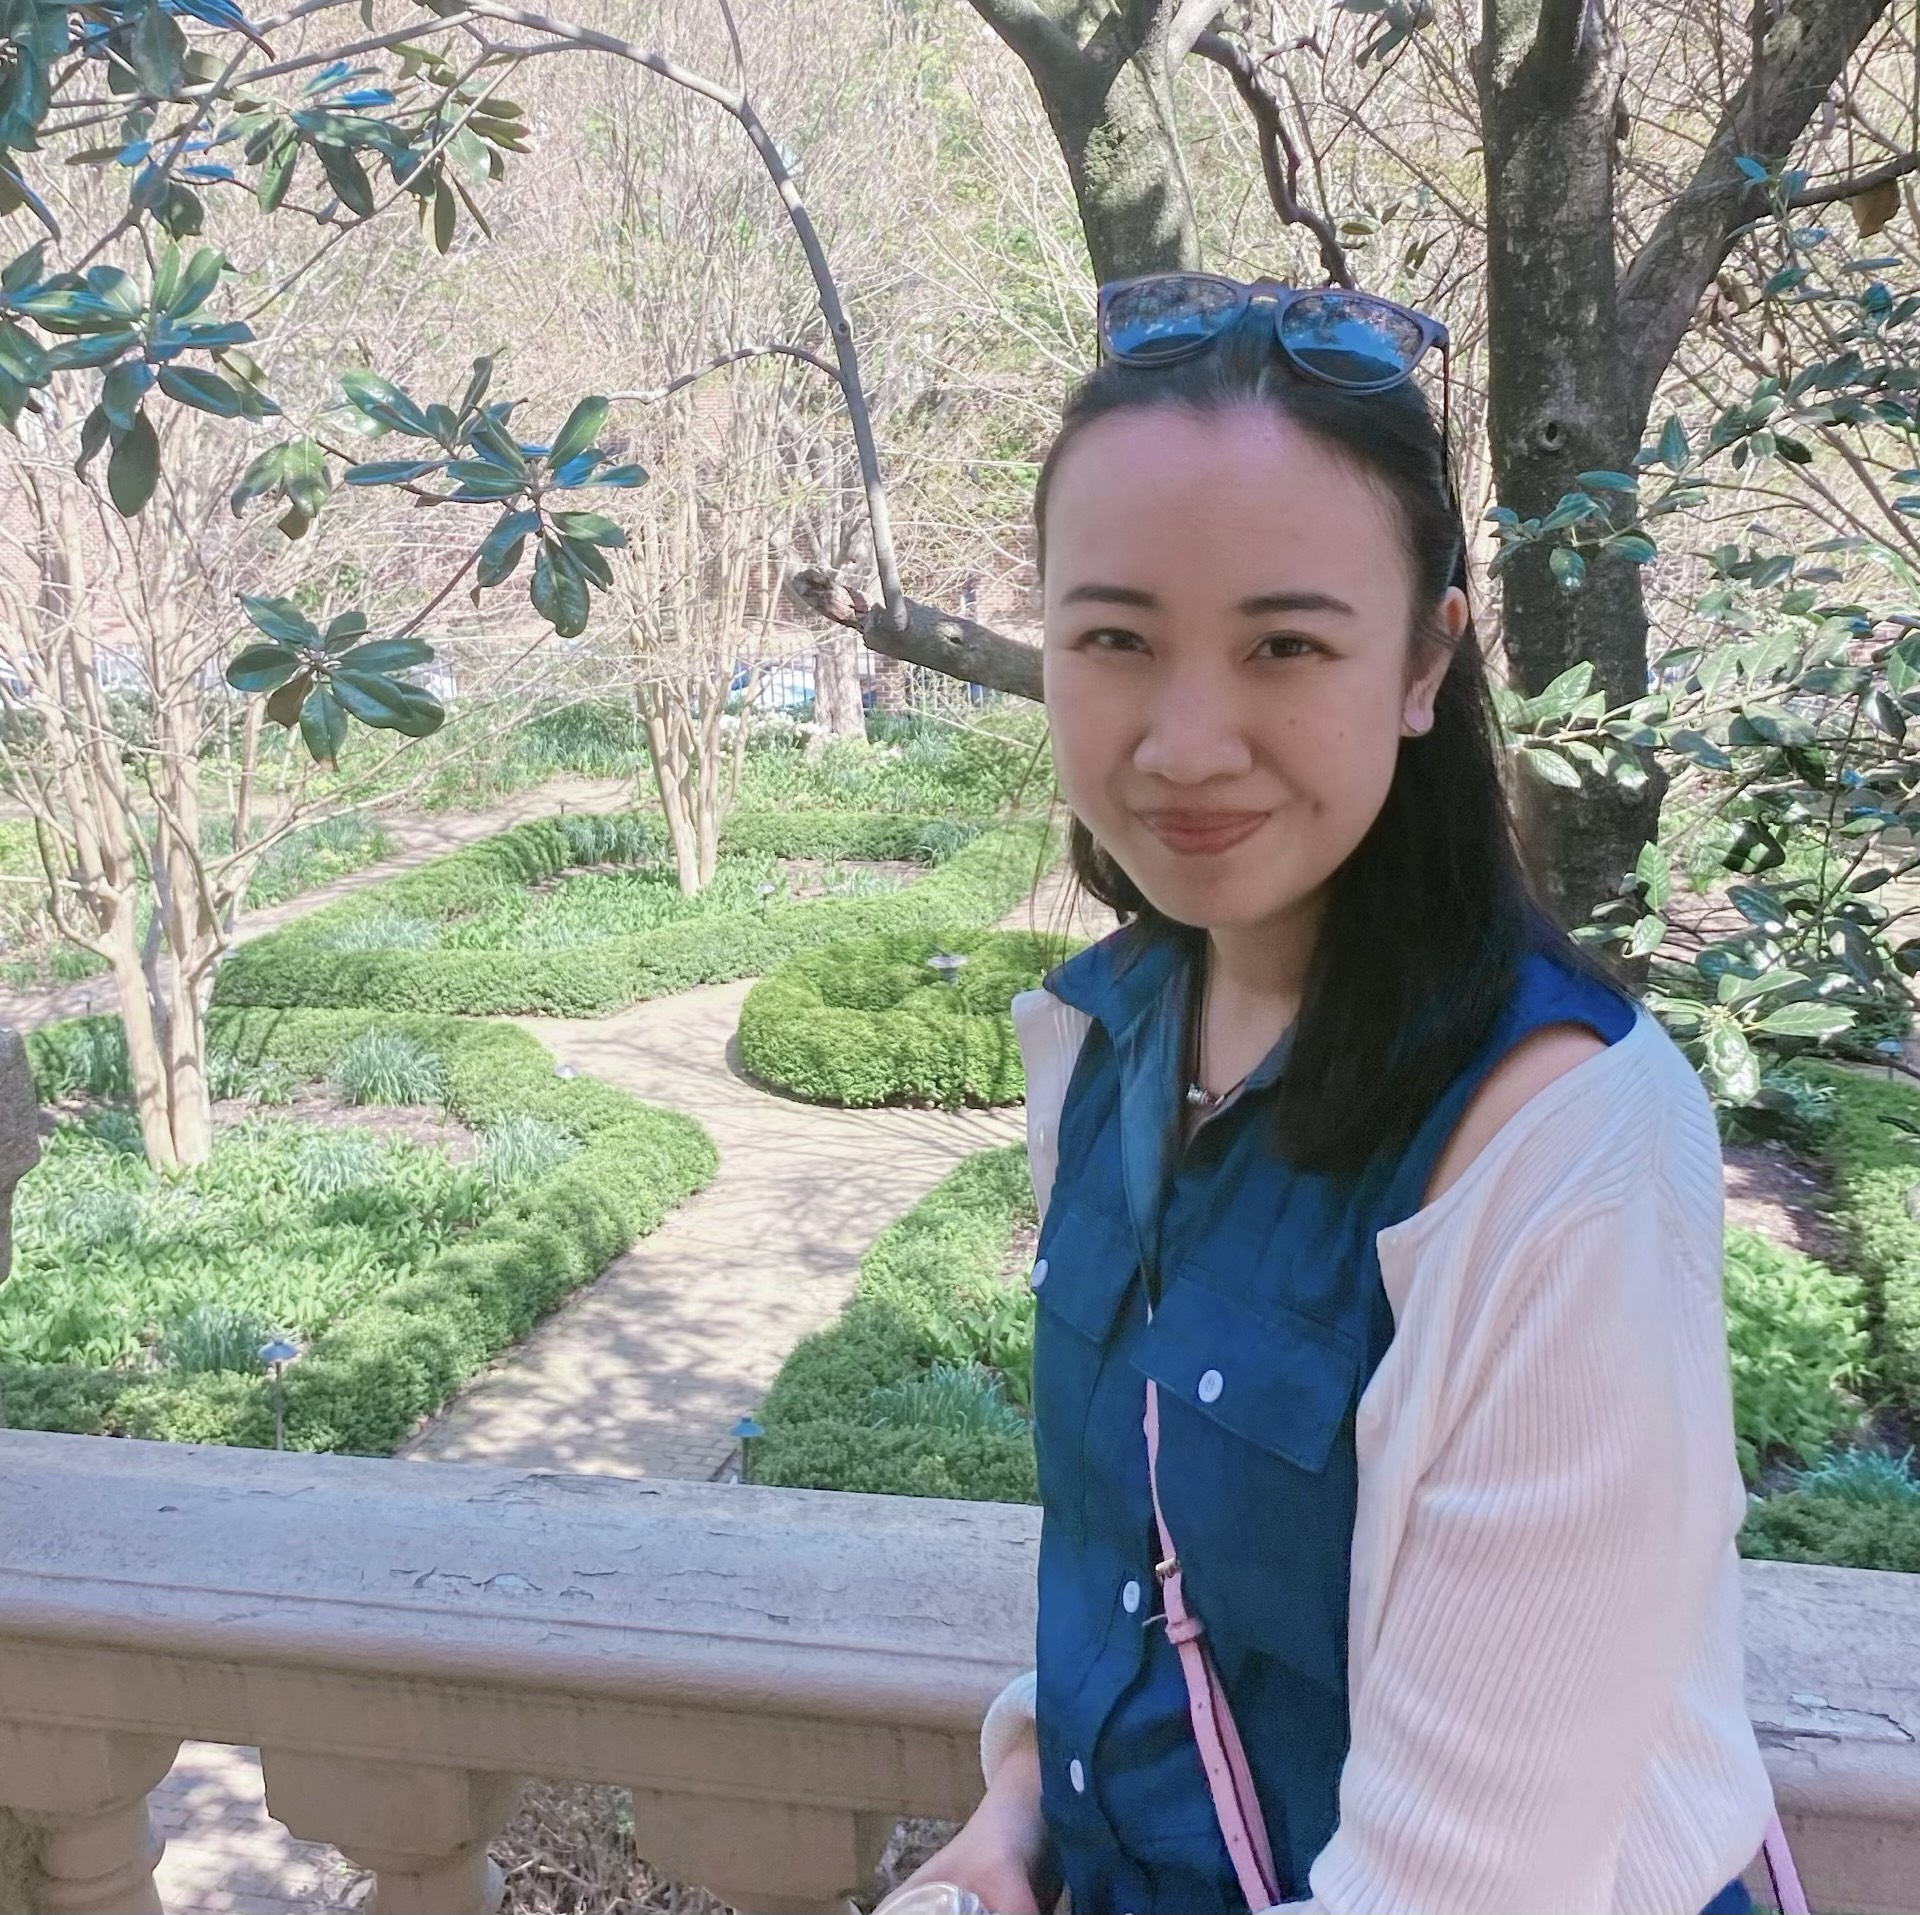 Photo of Carina Jiaxing Shi outdoors with trees and flowers in the background